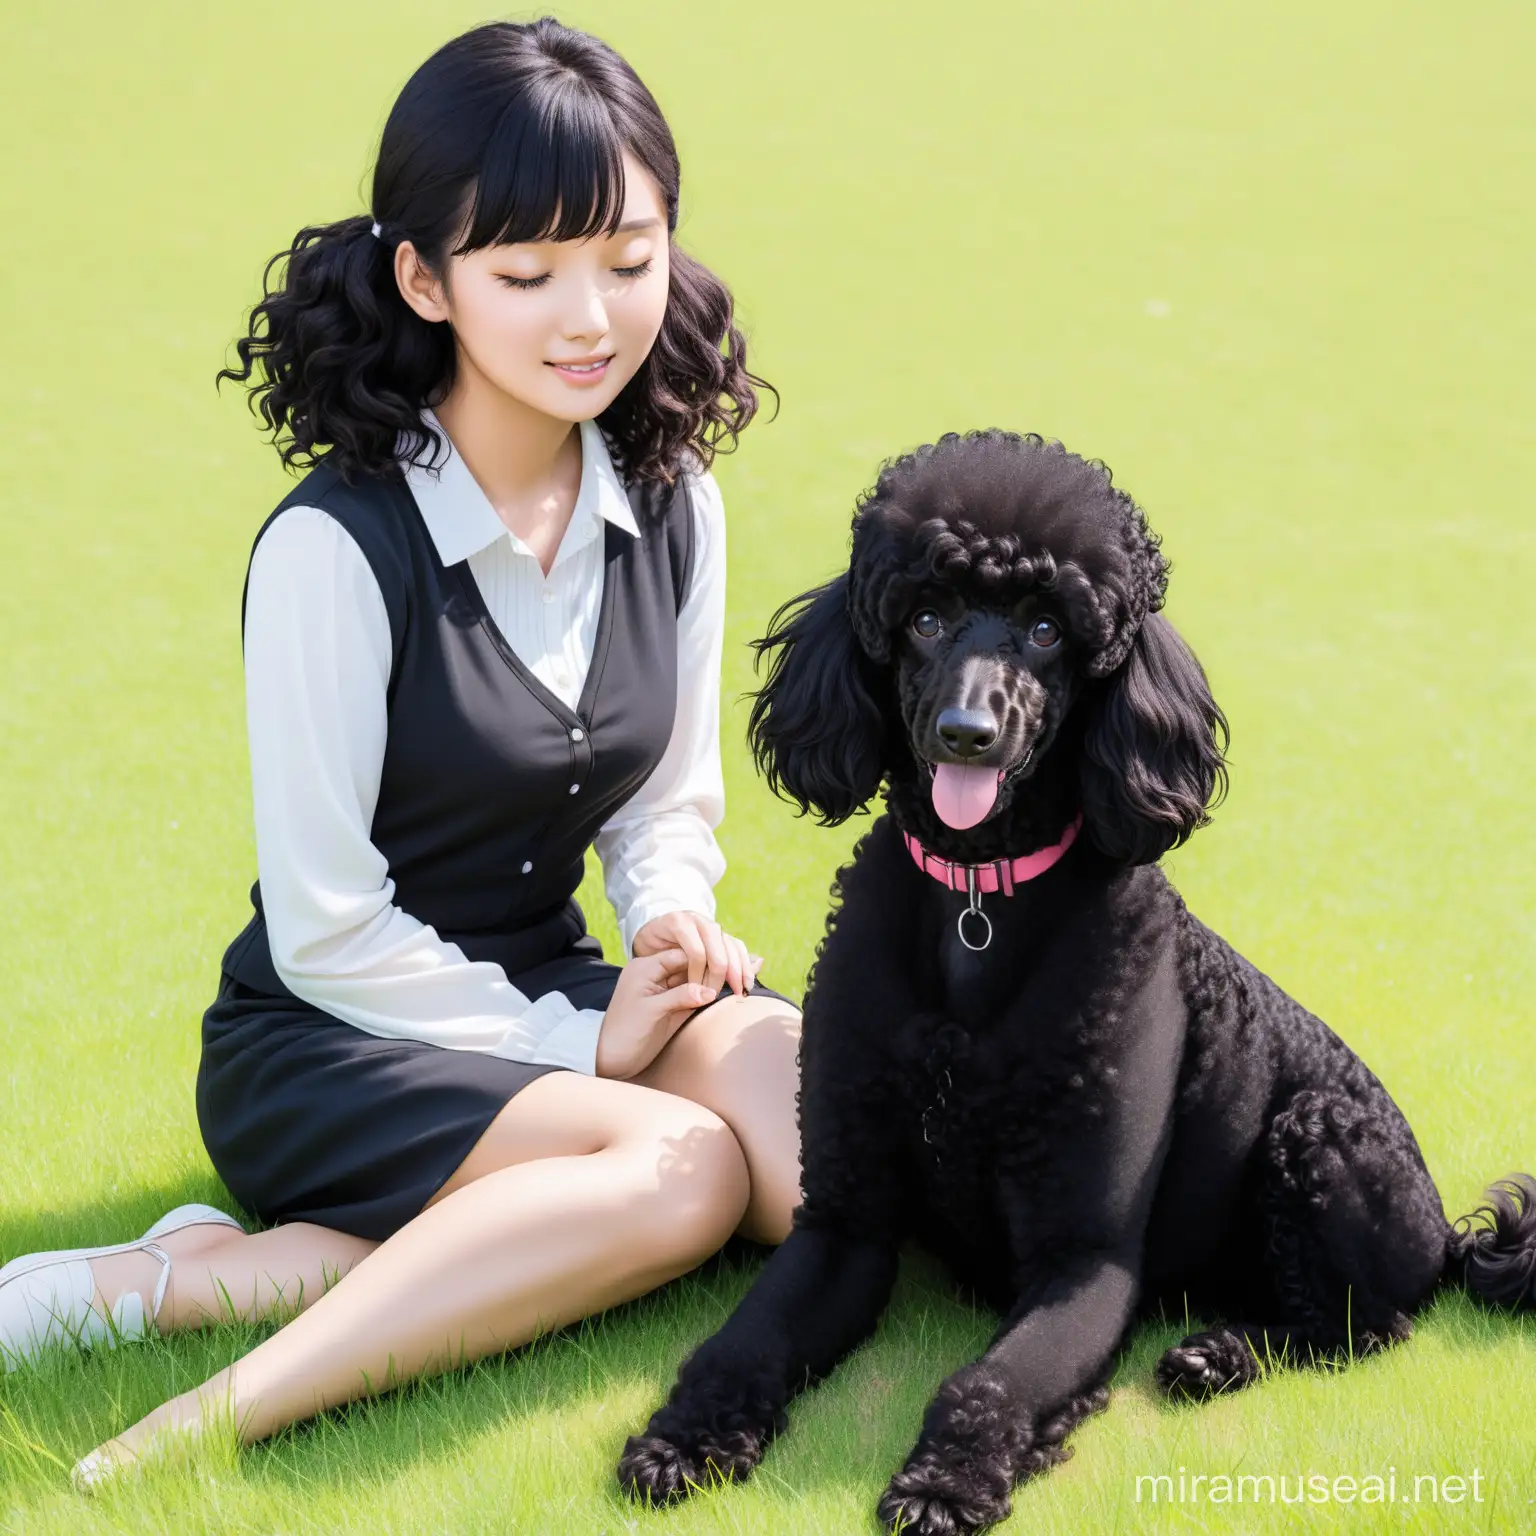 a black poodle and young woman, they are sitting in the grass